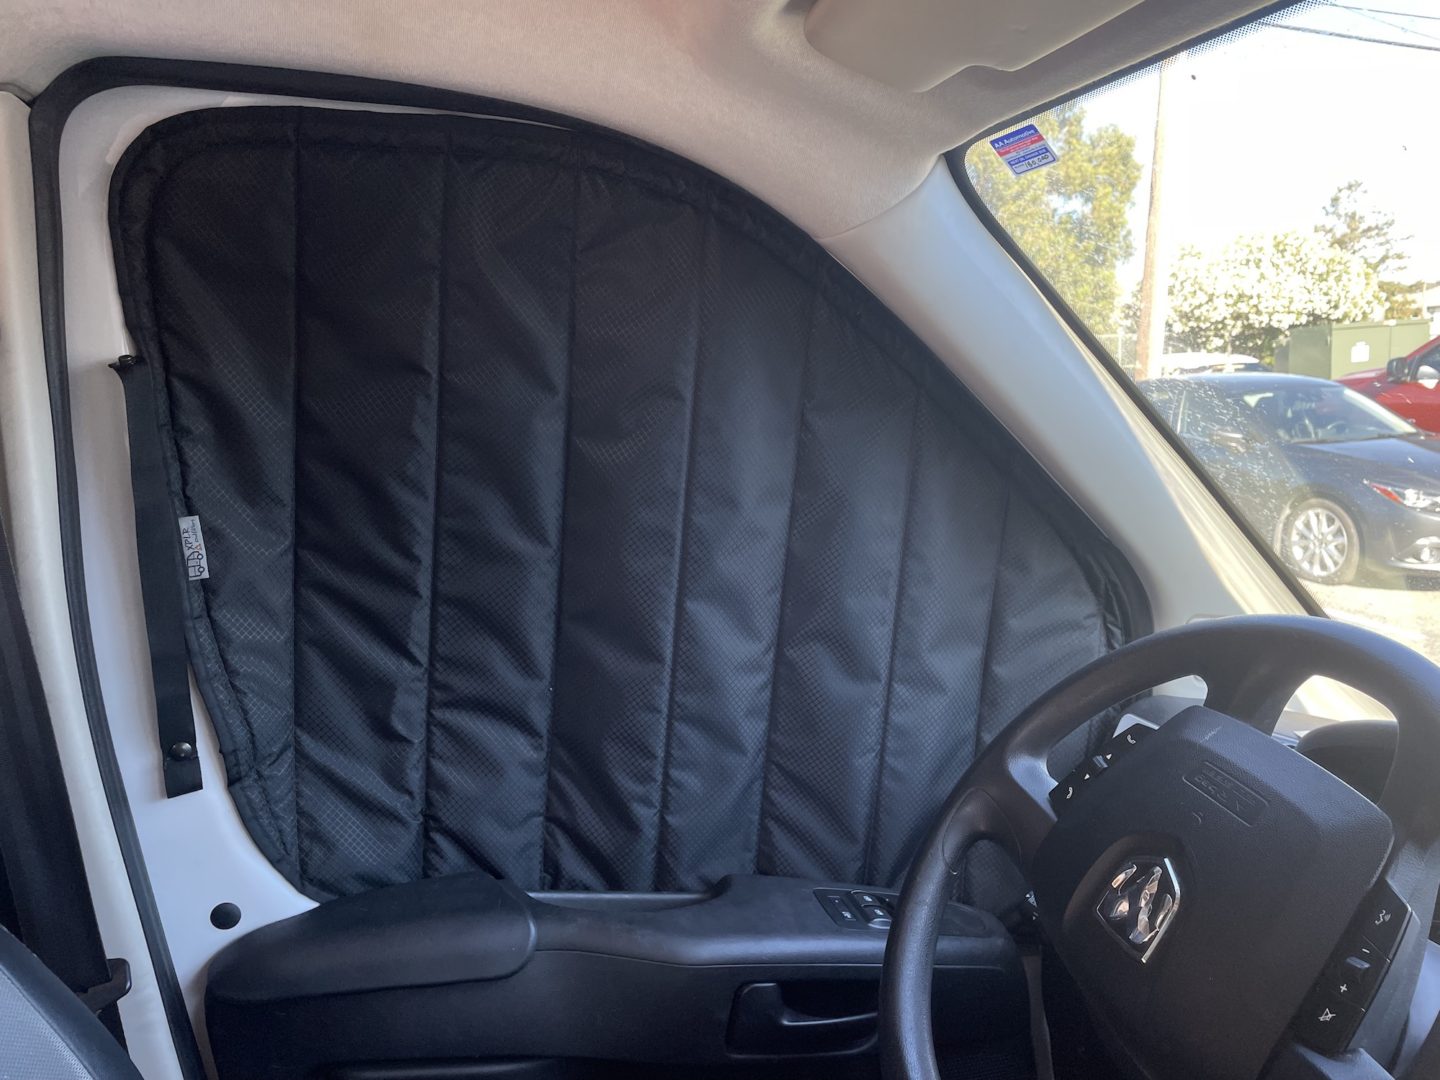 XPLR Outfitters Magnetic Window Covers